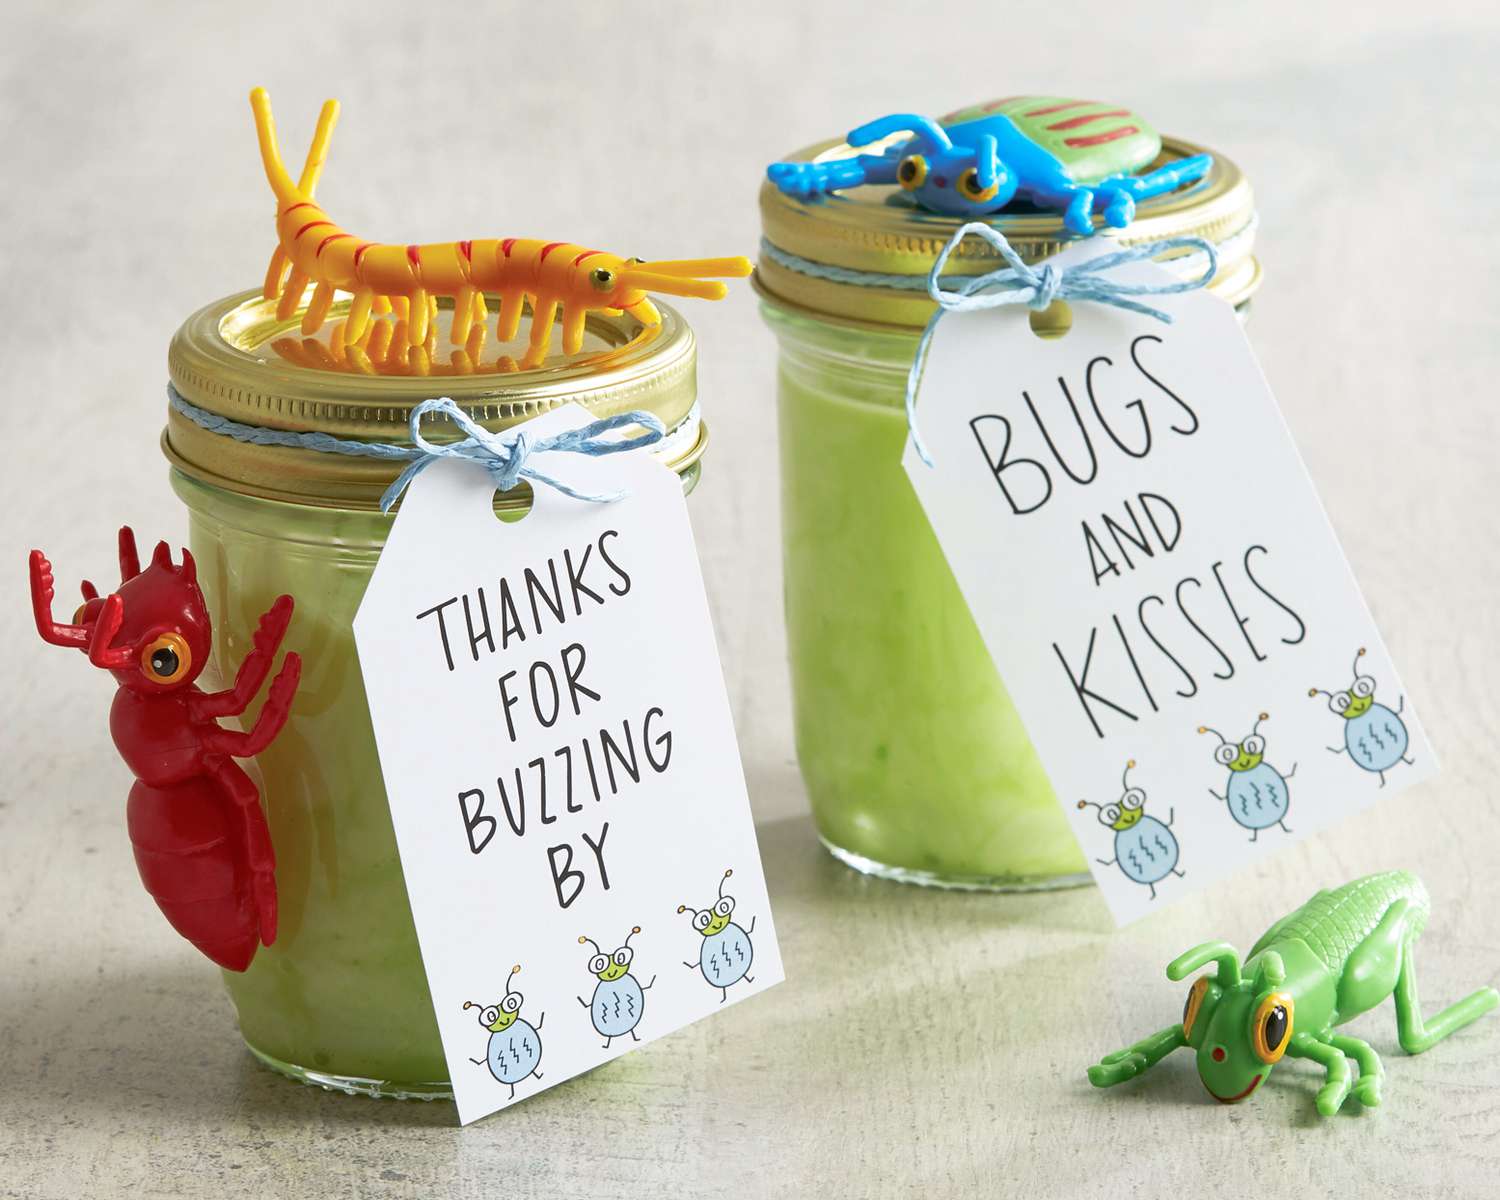 Birthday Party Favors for Kids - Fun DIY Ideas for Your Next Kids Party |  Better Homes & Gardens